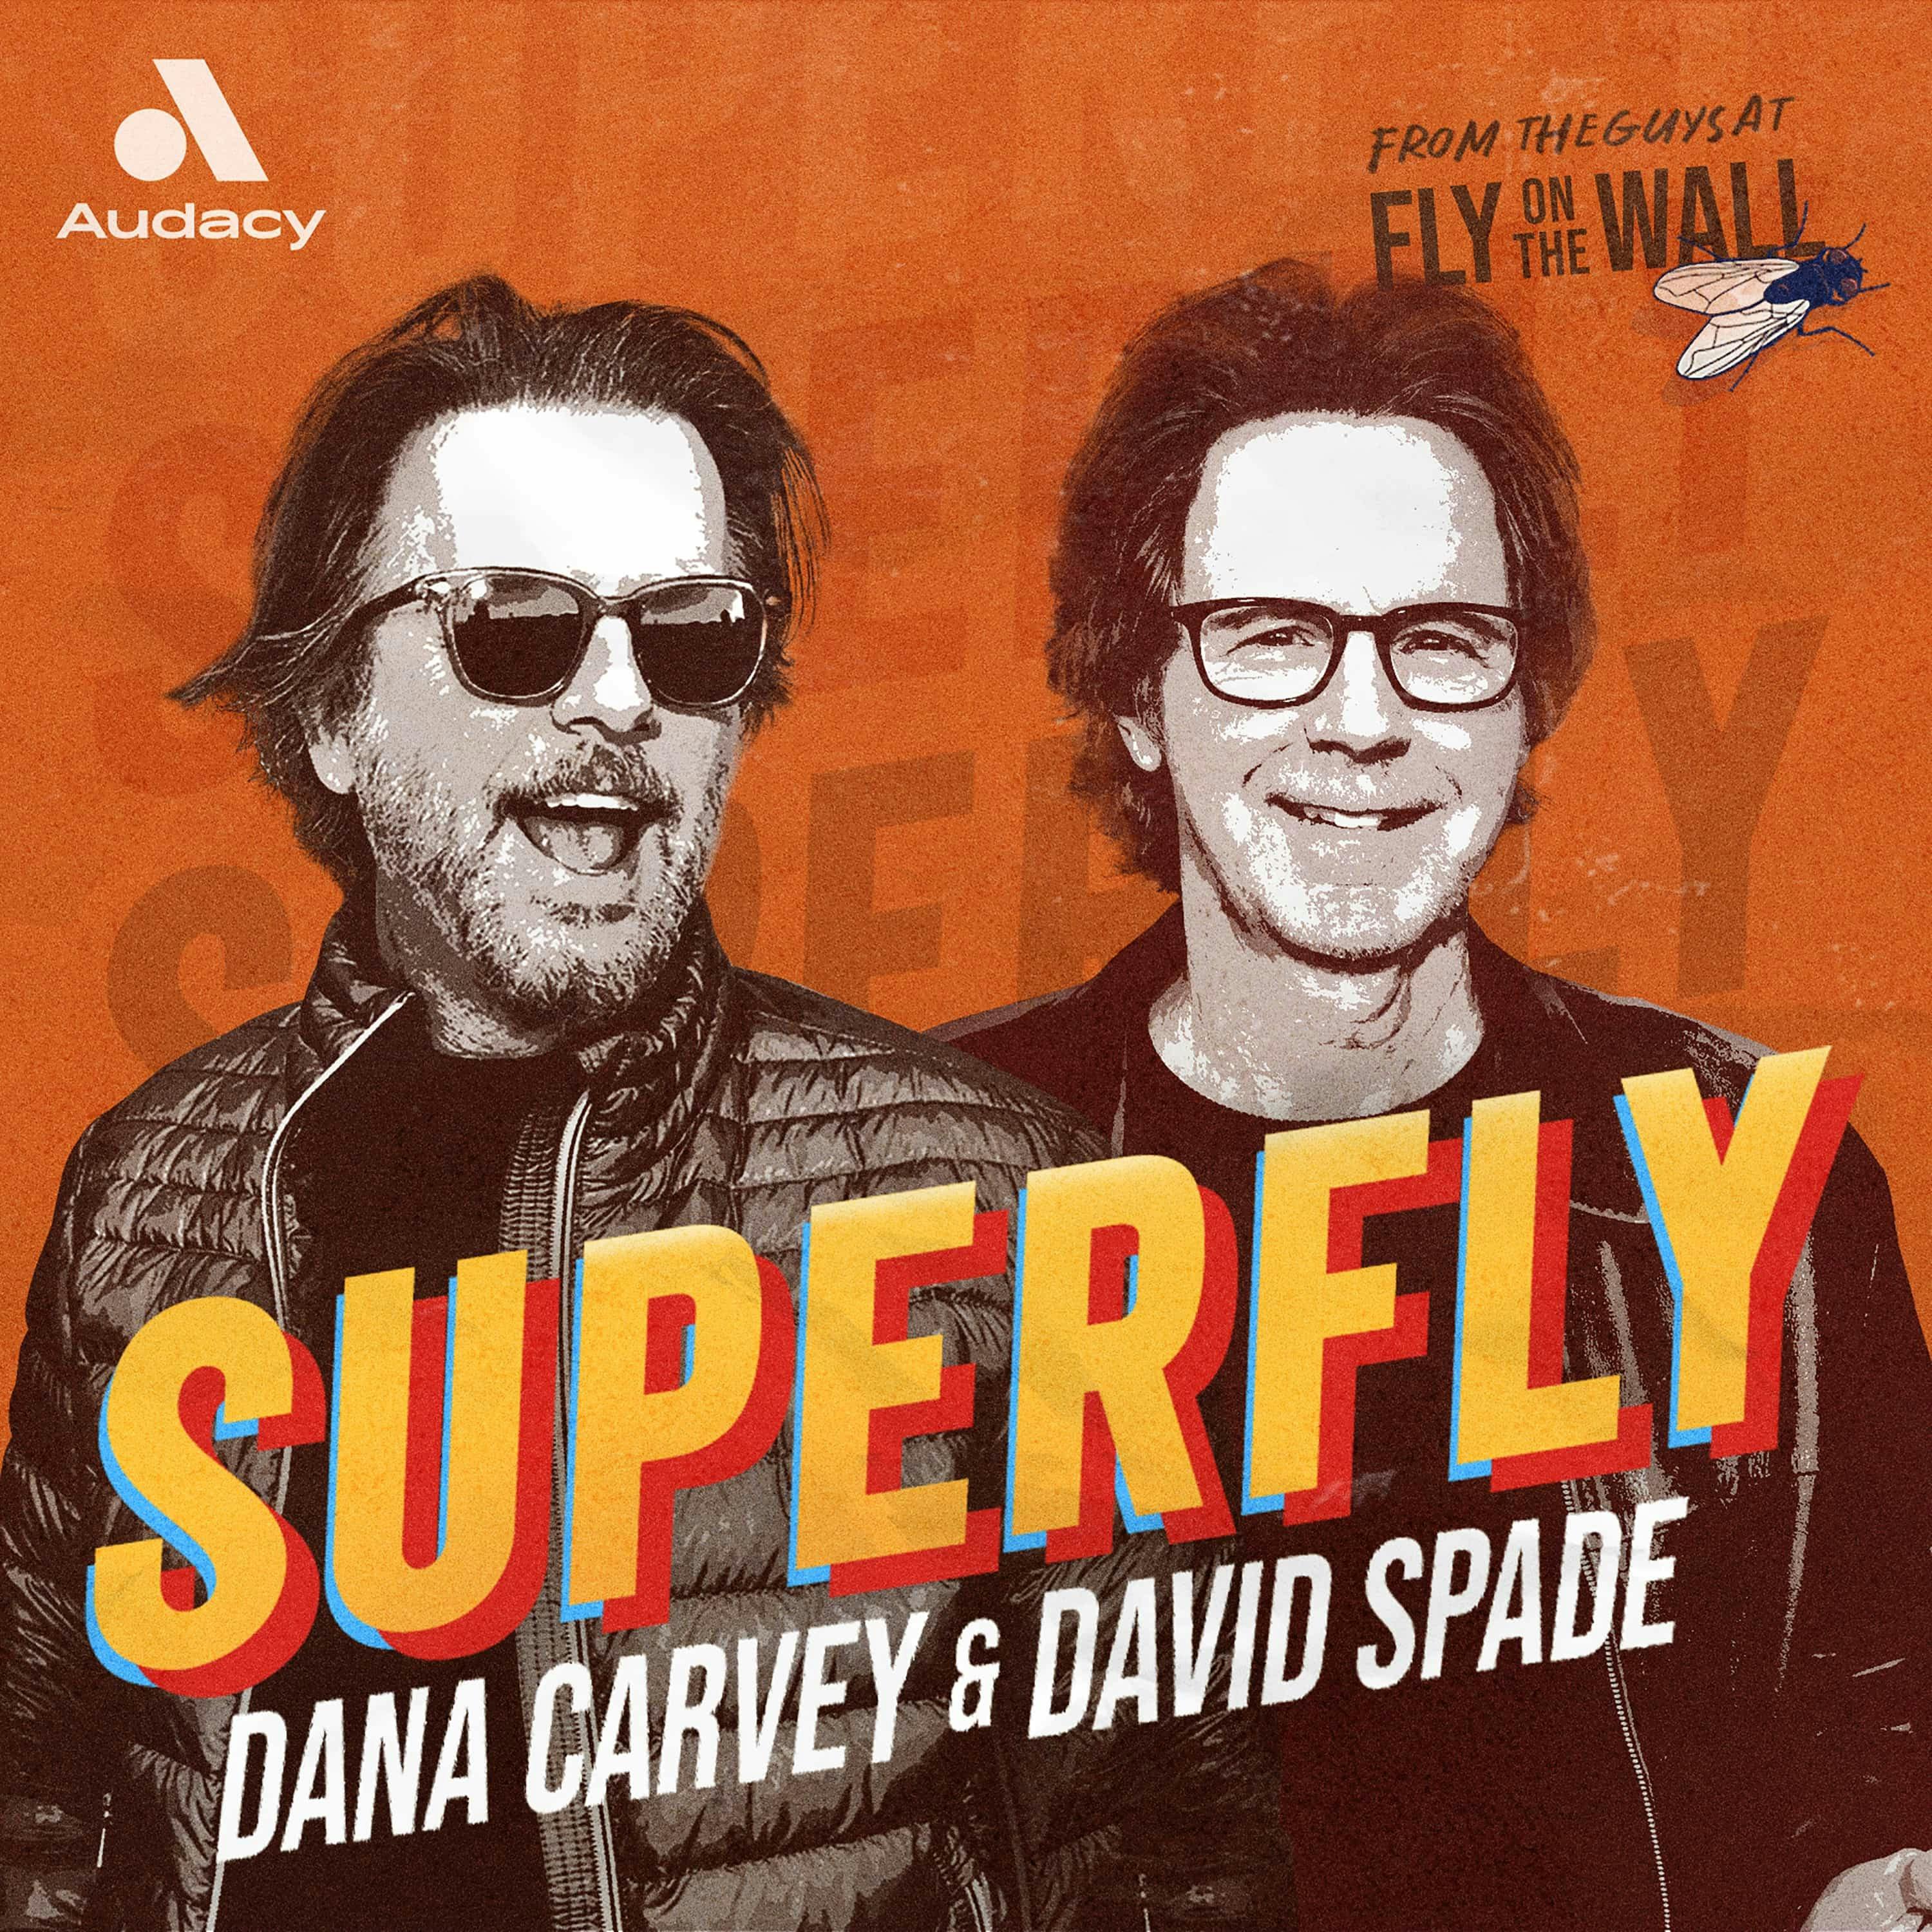 Introducing: Superfly from Fly on the Wall with Dana Carvey and David Spade